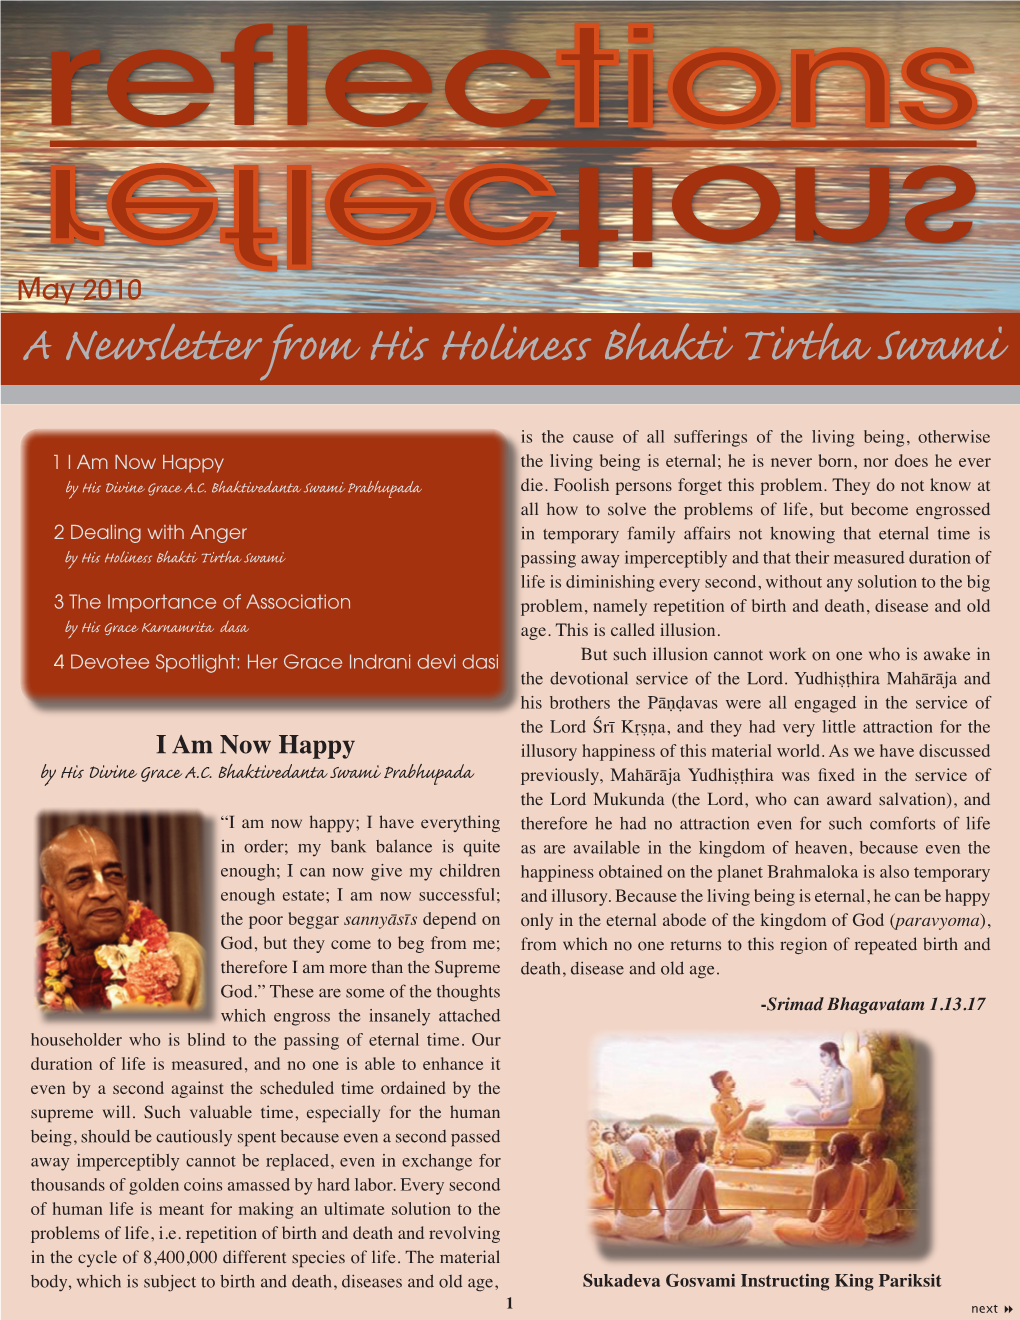 A Newsletter from His Holiness Bhakti Tirtha Swami